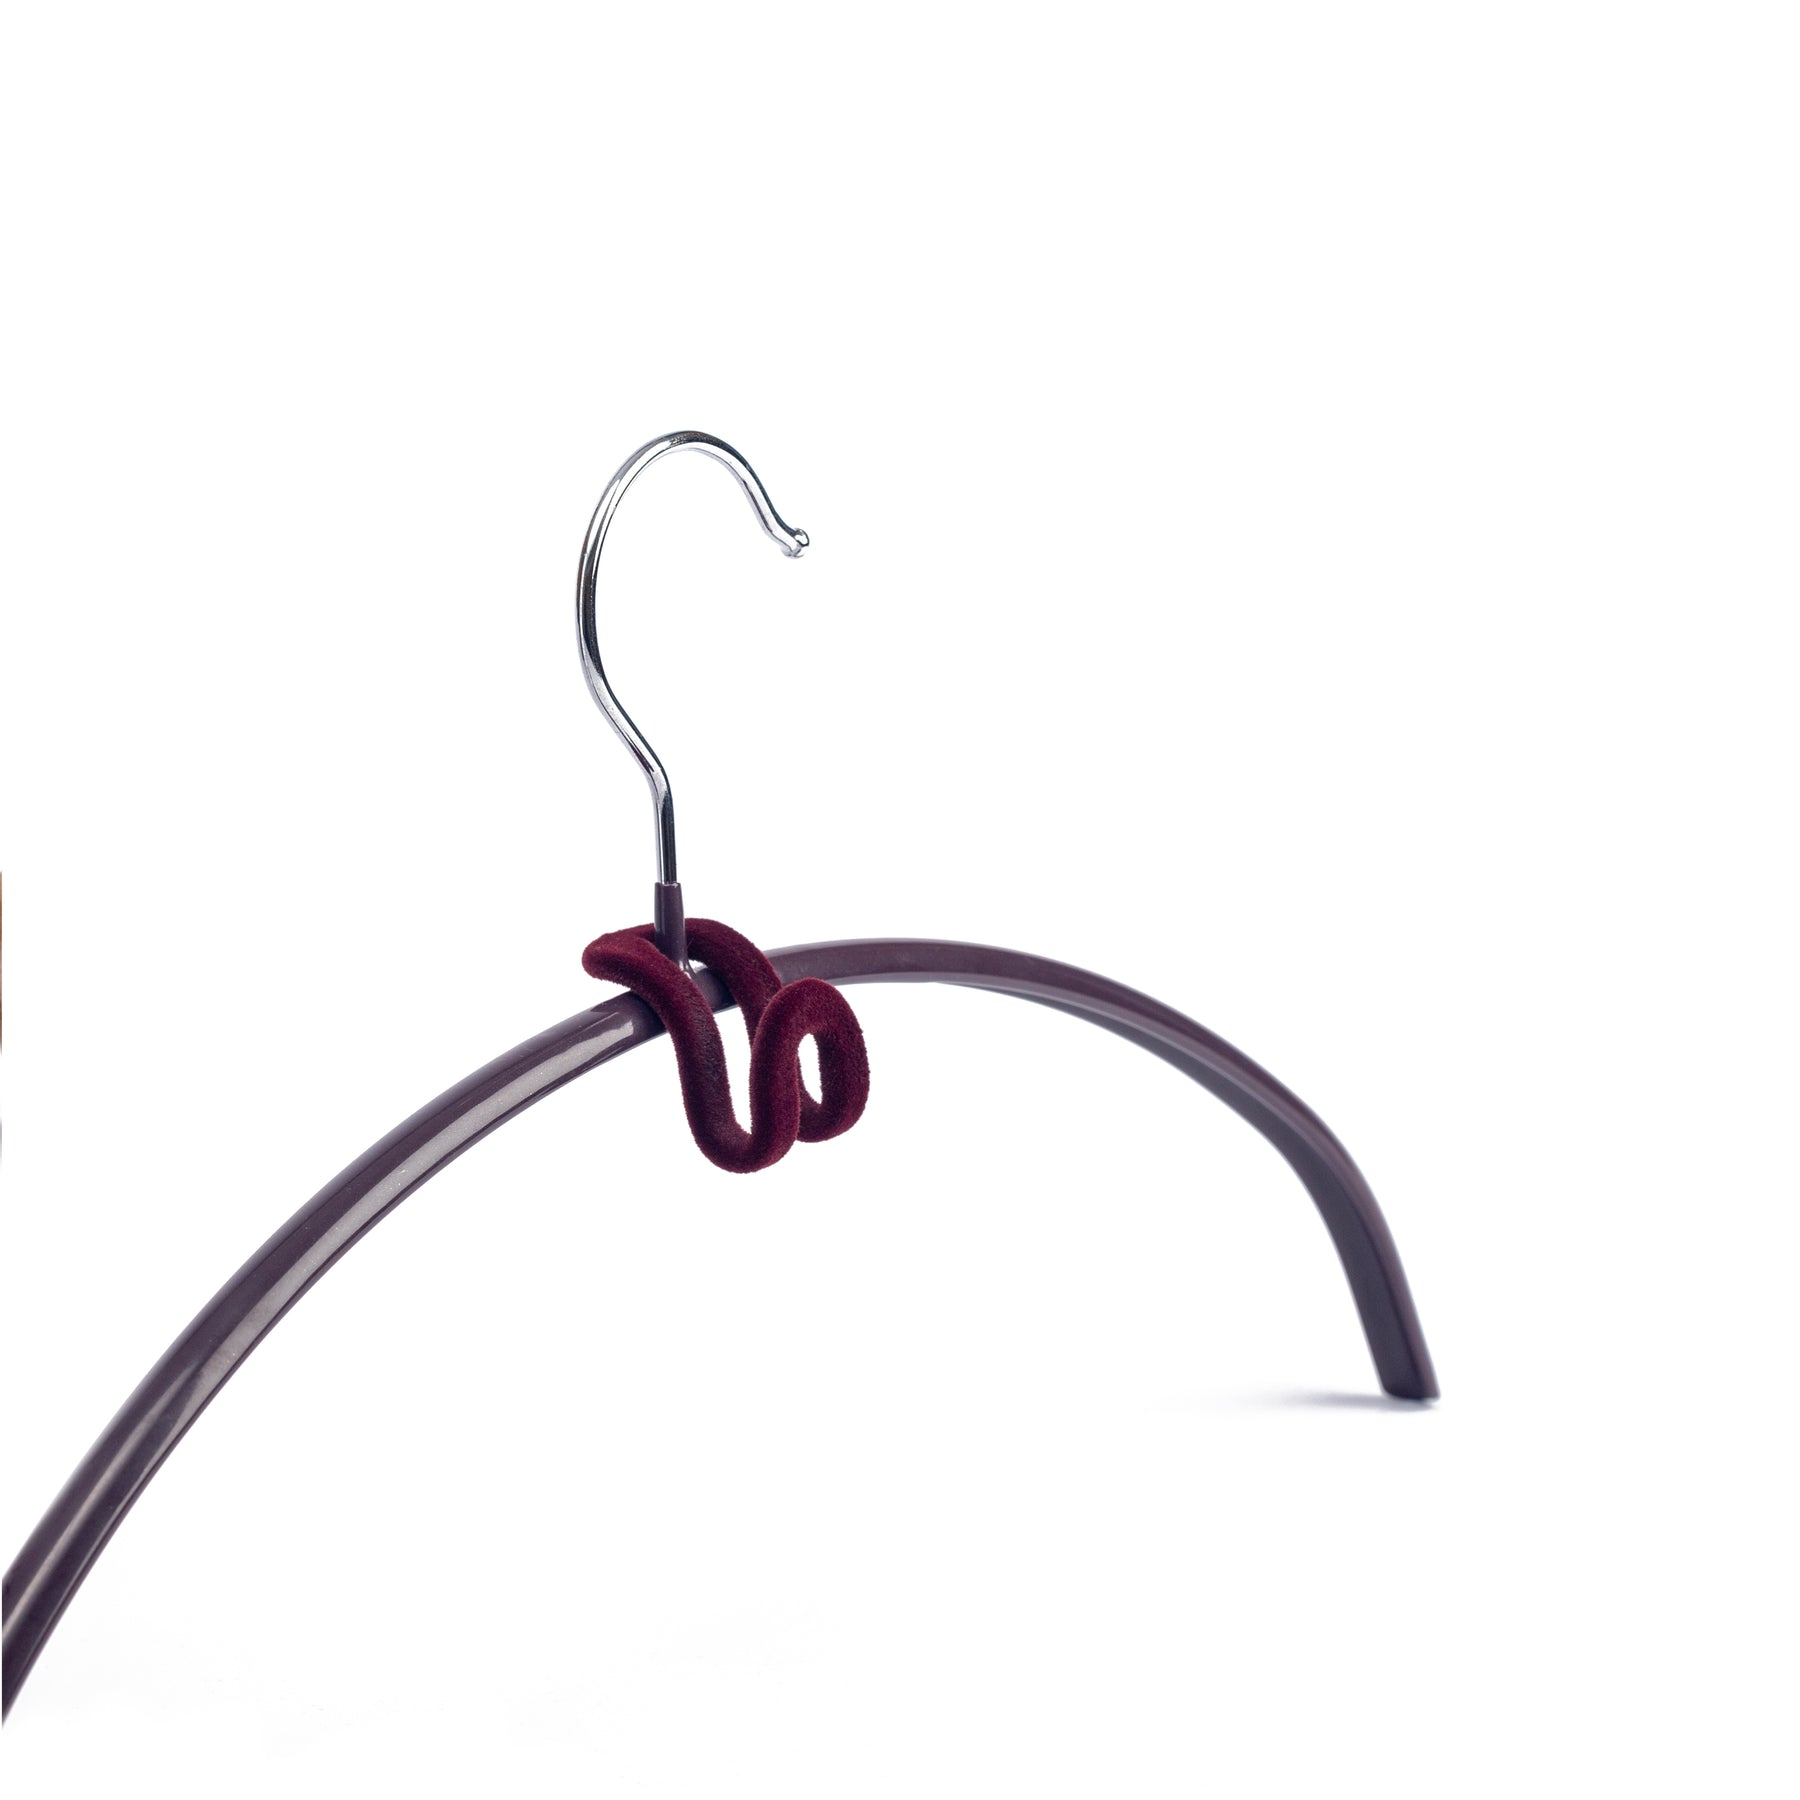 Burgundy hanger extension attached to Chinese knot hanger